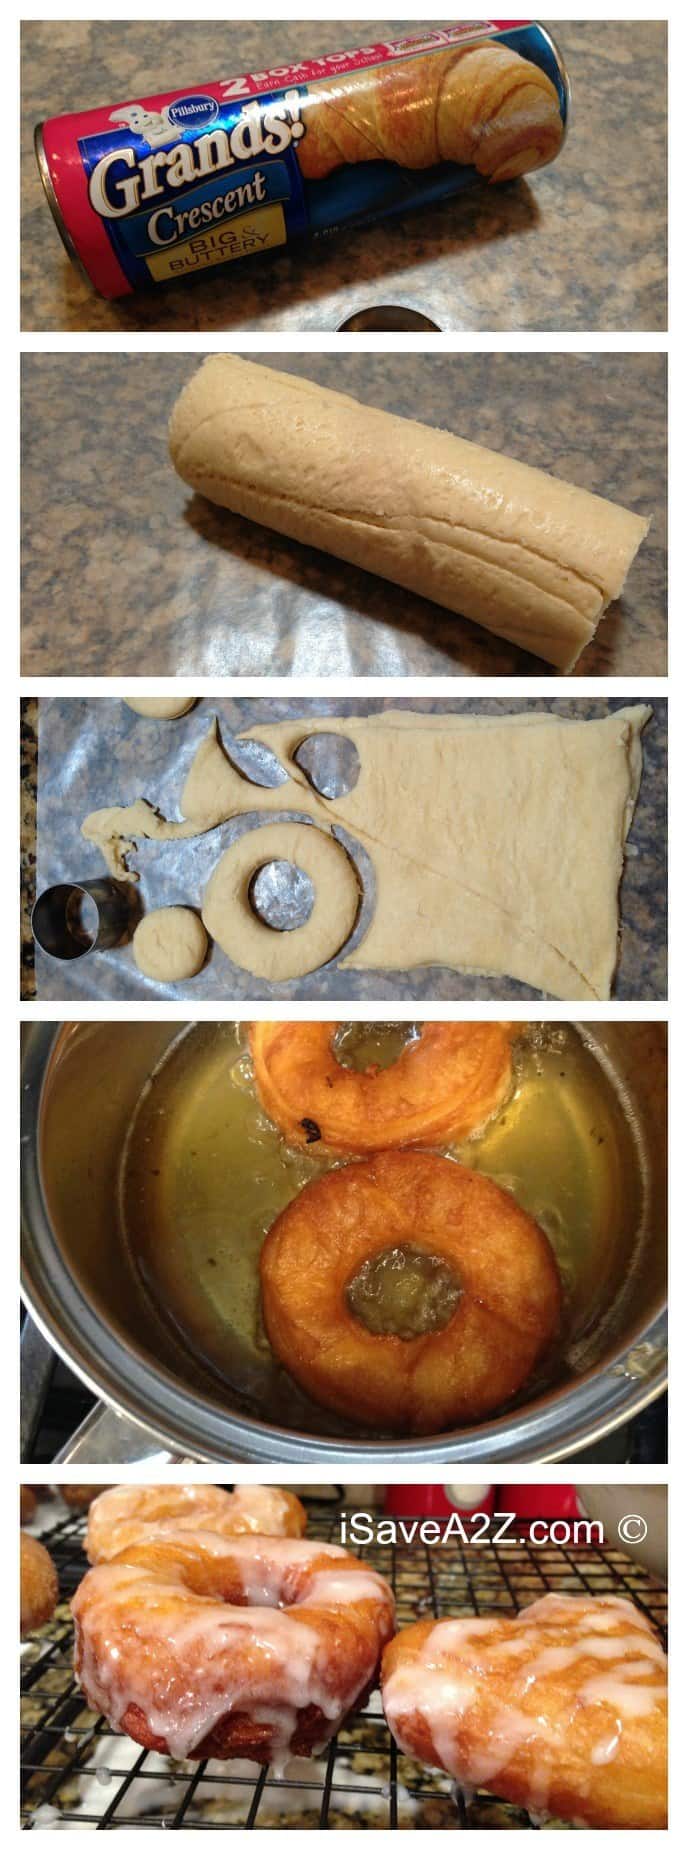 Simple Donut Recipe made from Cresent Rolls